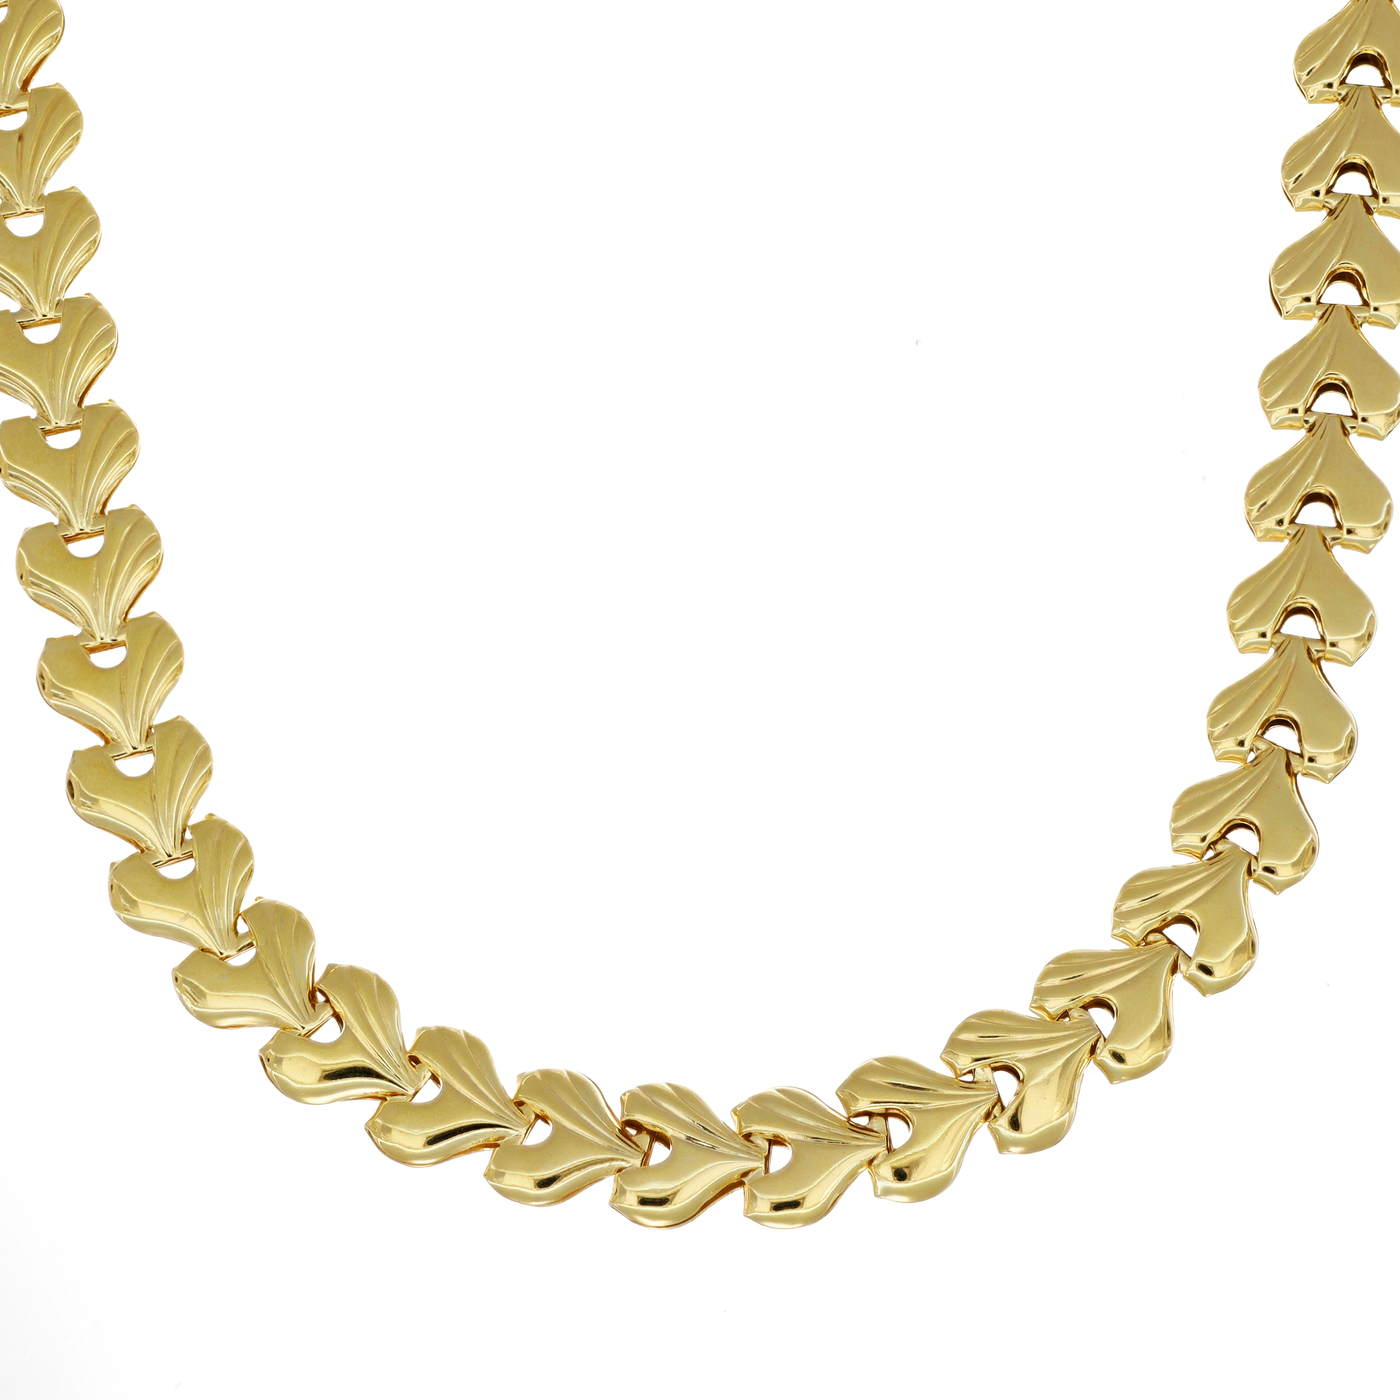 IL Diletto - 925 Italian Silver Necklace, Heart Link 8mm, 43cm, Gold Plated